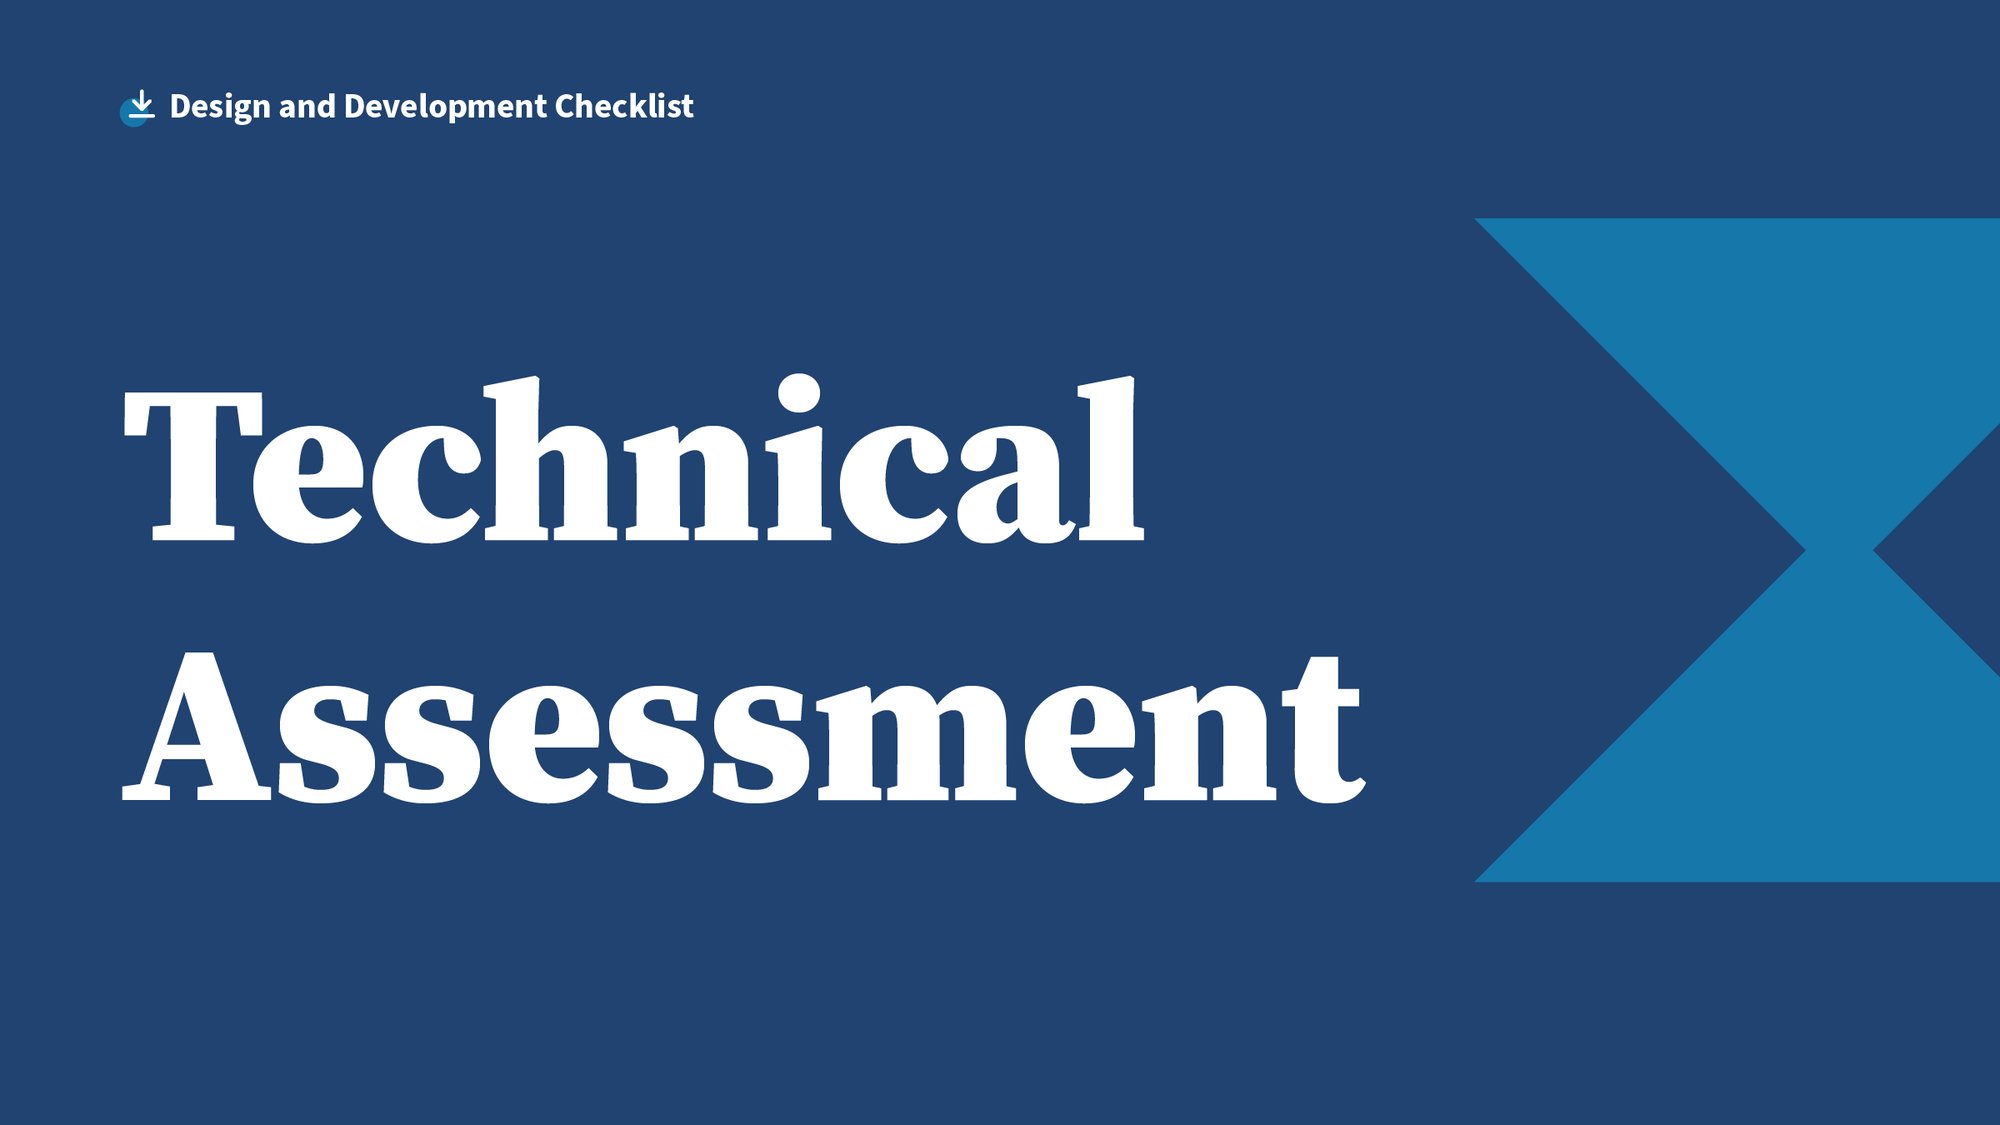 Cover of the Technical Assessment Checklist from OXD in shades of blue